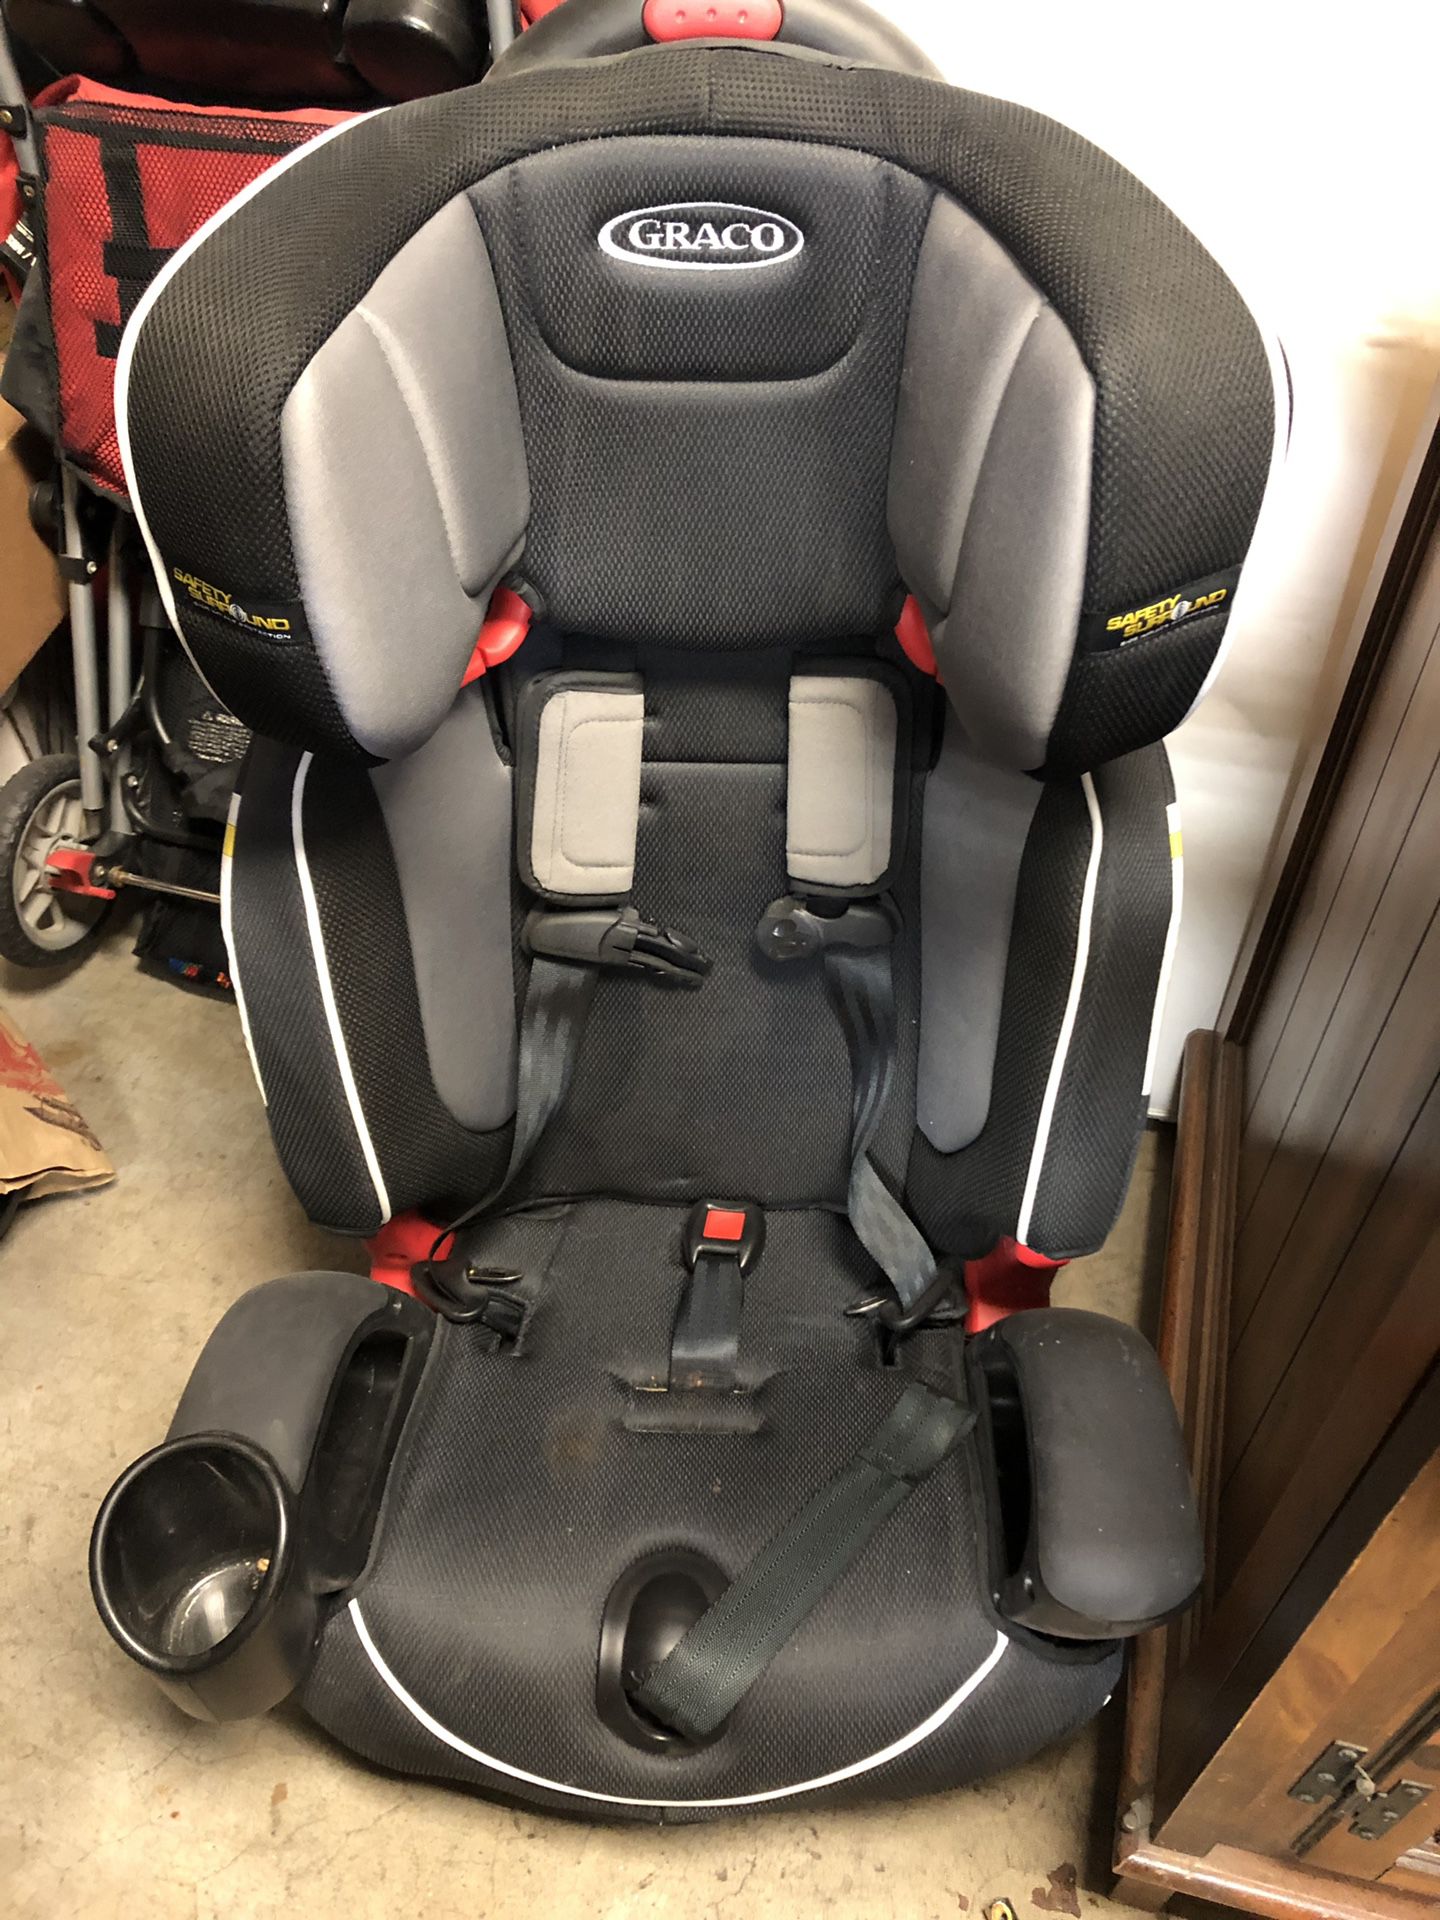 Graco car seat booster